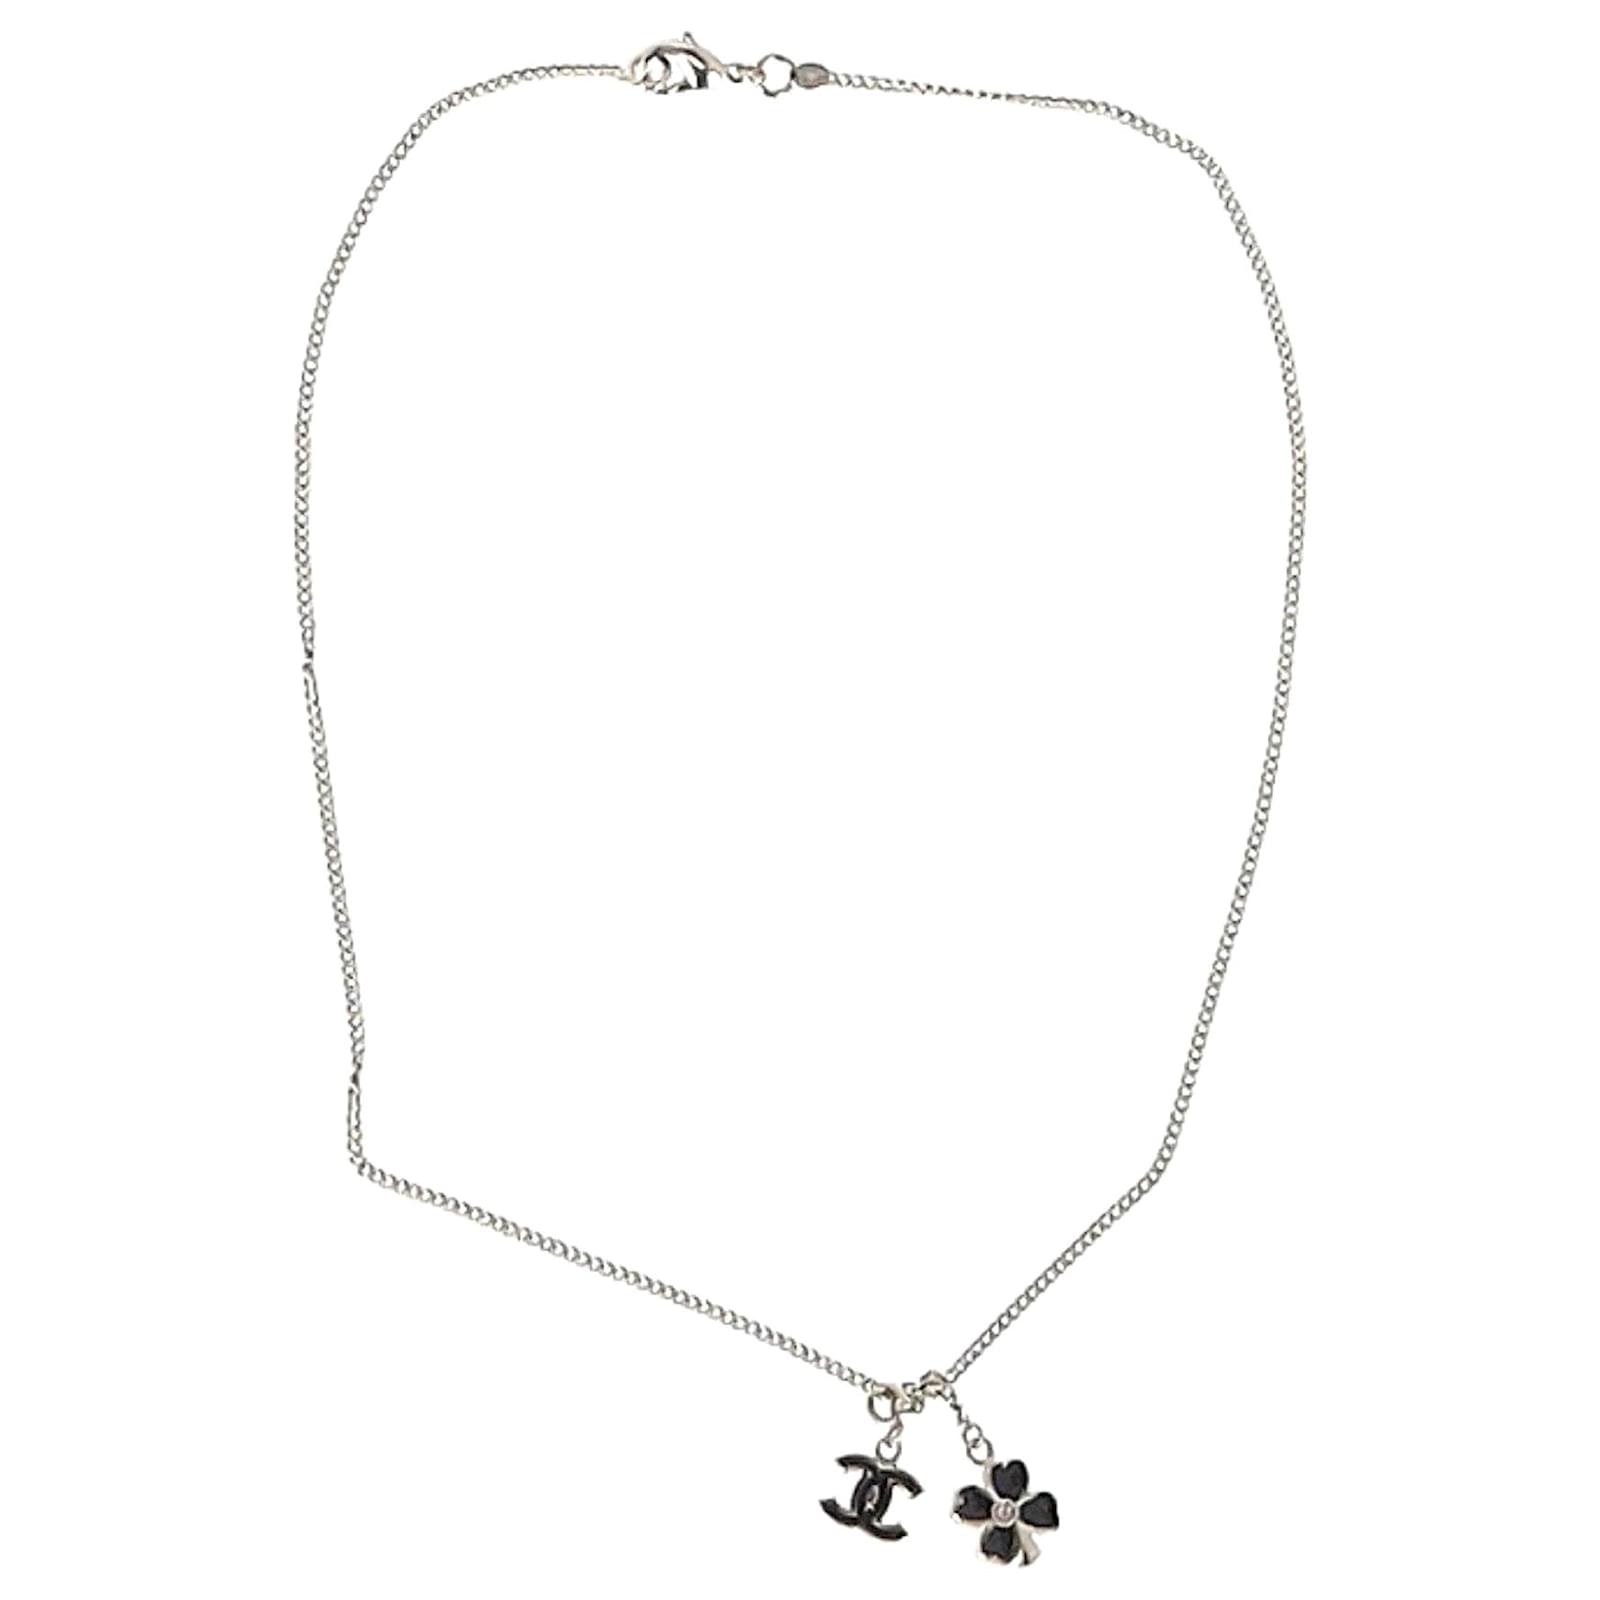 Necklaces Chanel Chanel 2007 CC Clover Charm Necklace in Gold Metal Size Unique Inter